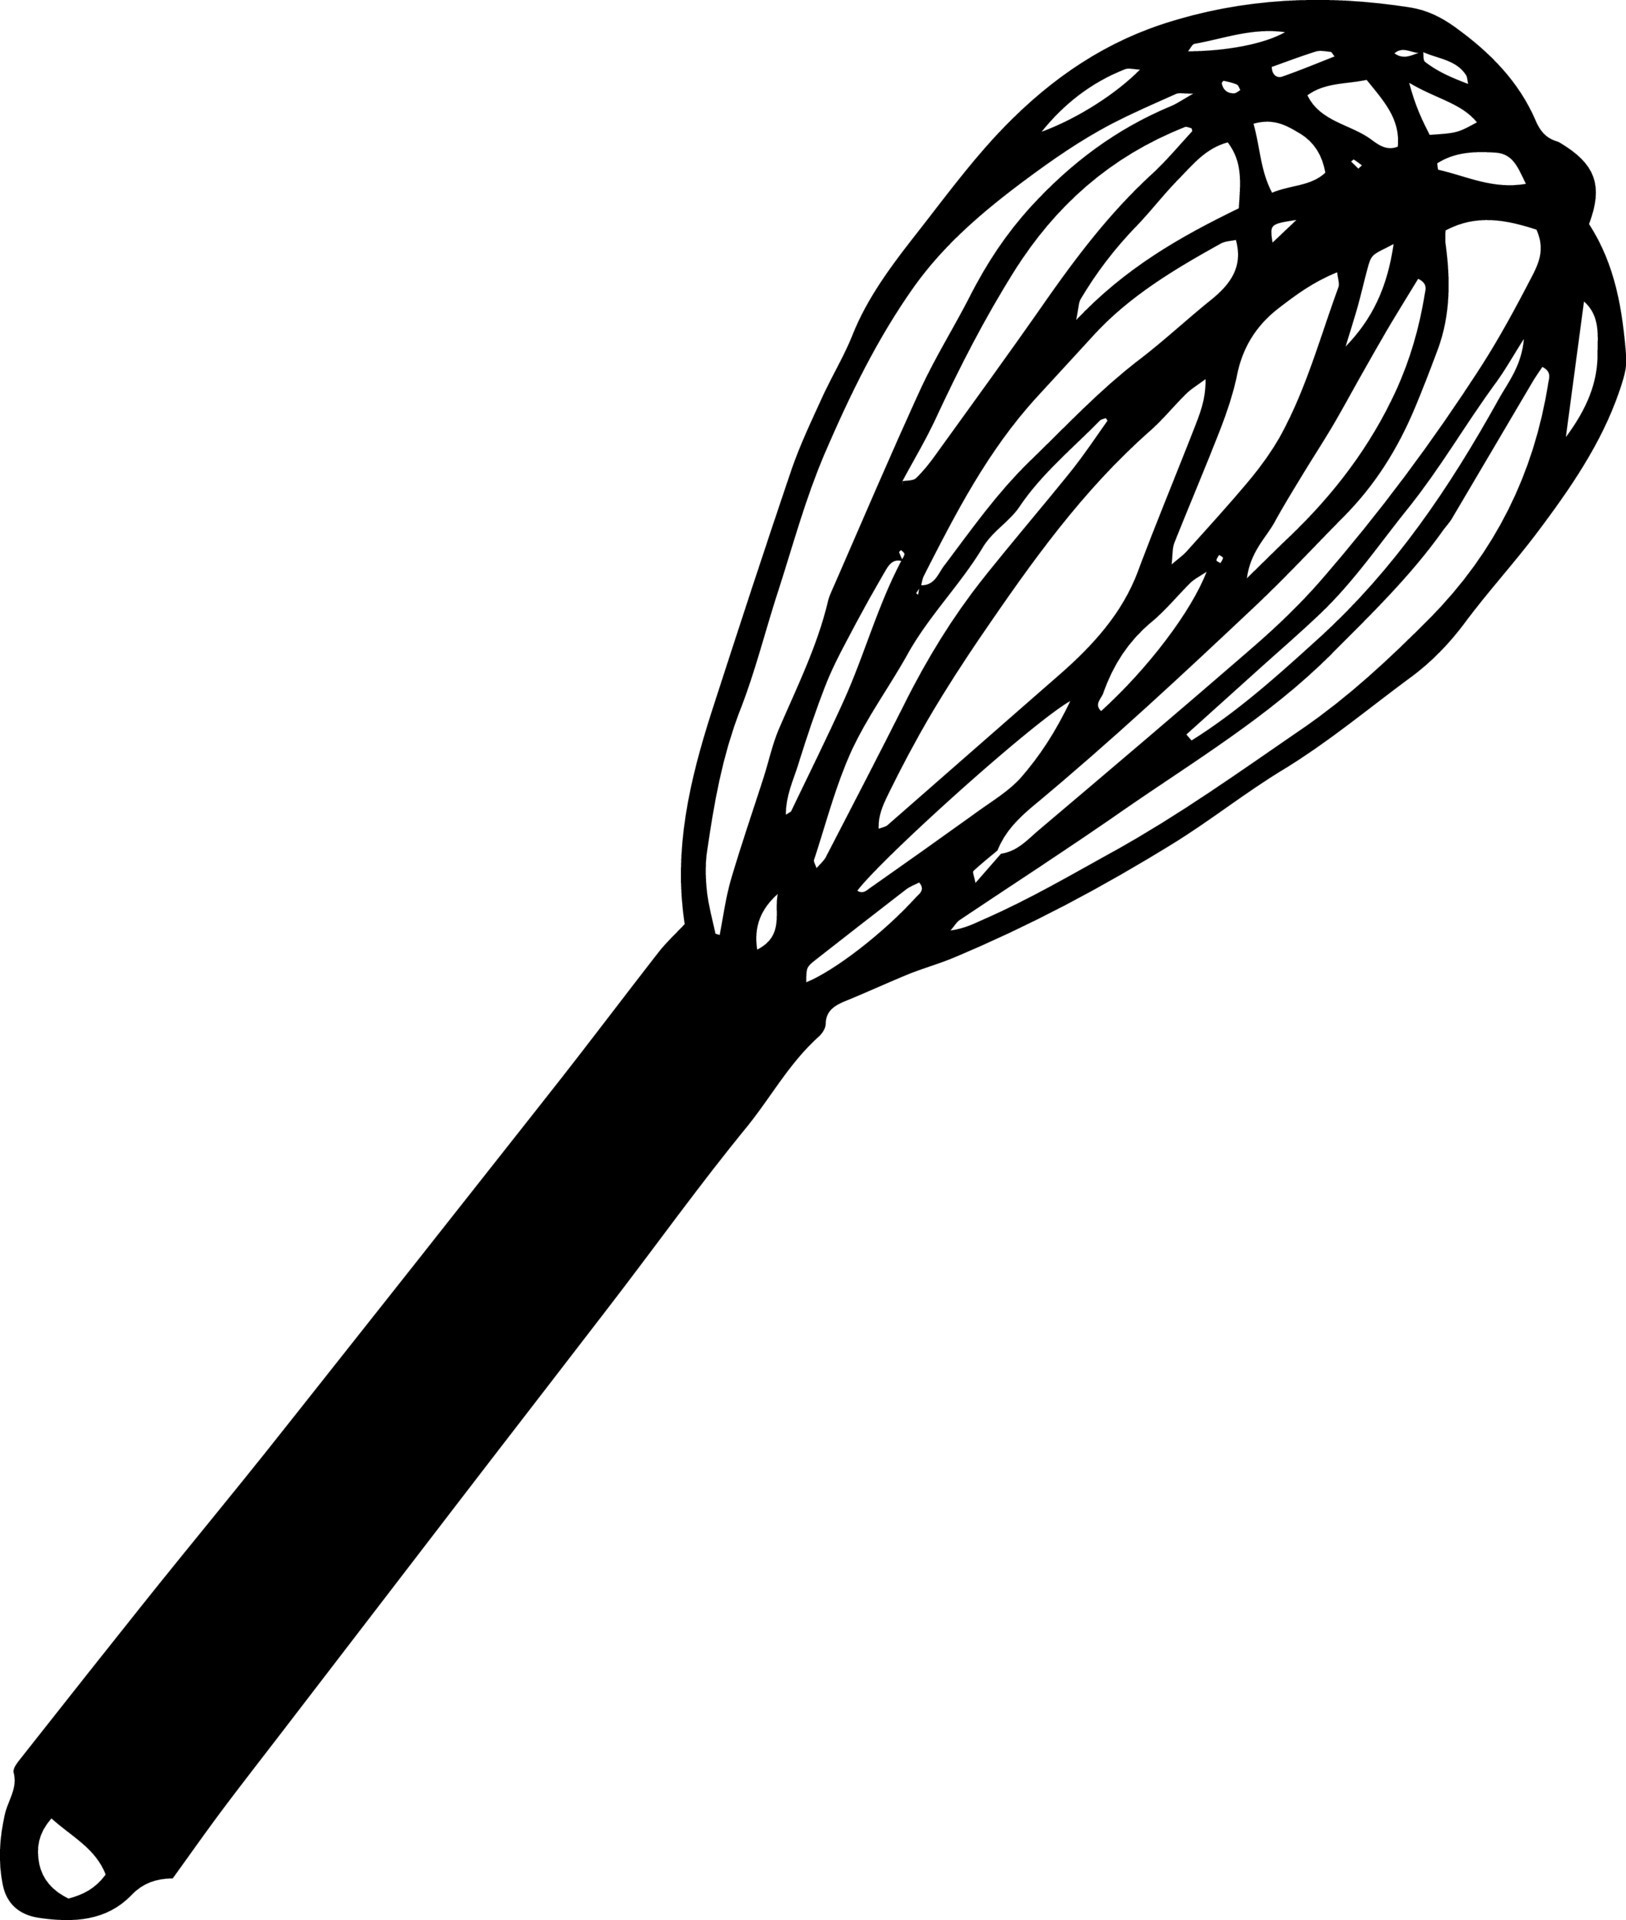 https://static.vecteezy.com/system/resources/previews/008/545/190/original/whisk-icon-sticker-sketch-hand-drawn-doodle-style-minimalism-monochrome-kitchen-dishes-cooking-food-vector.jpg